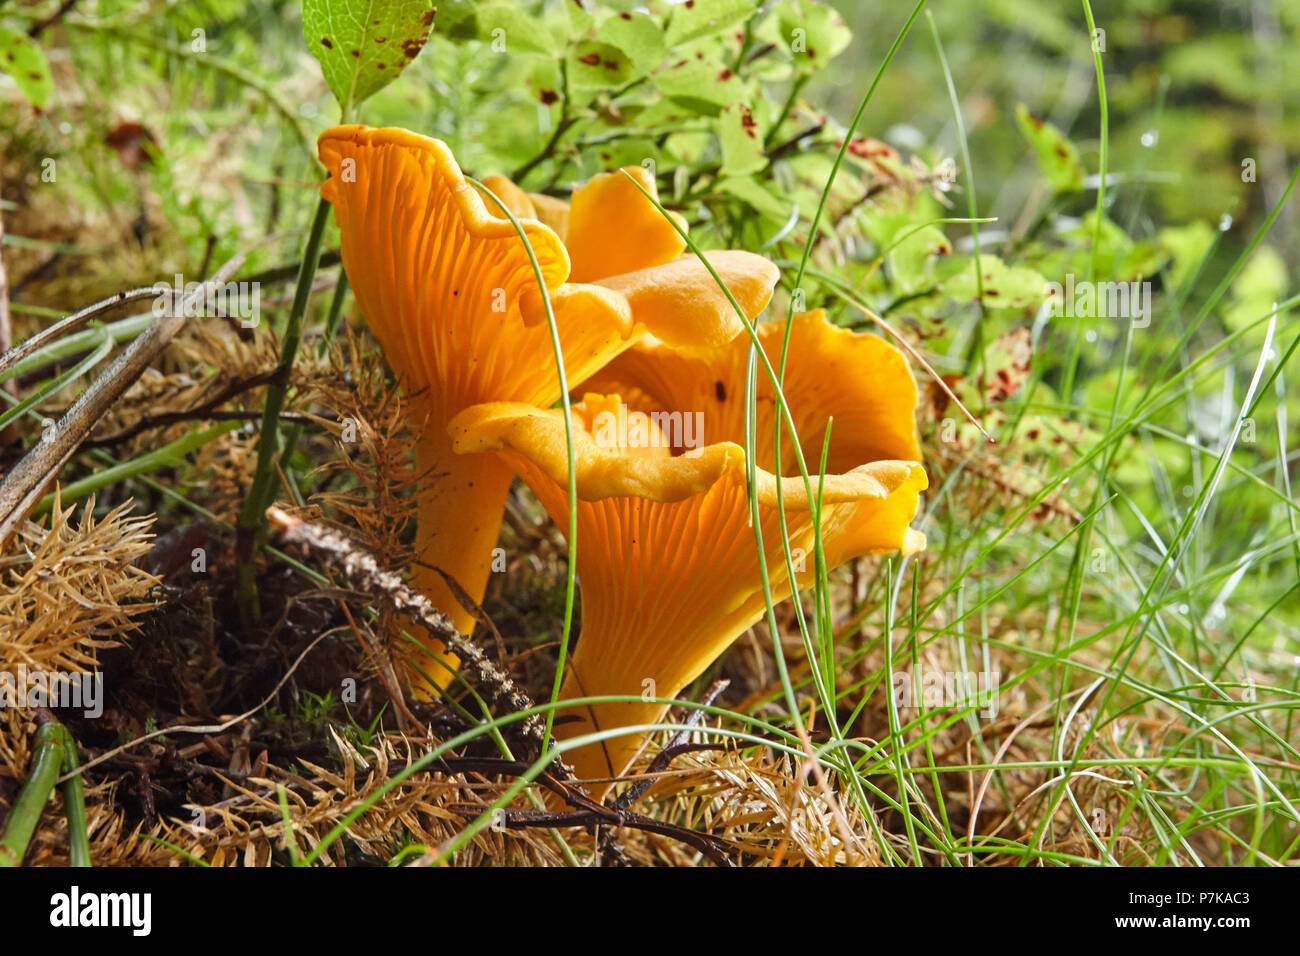 Trumpet chanterelles growing in the forest floor Stock Photo